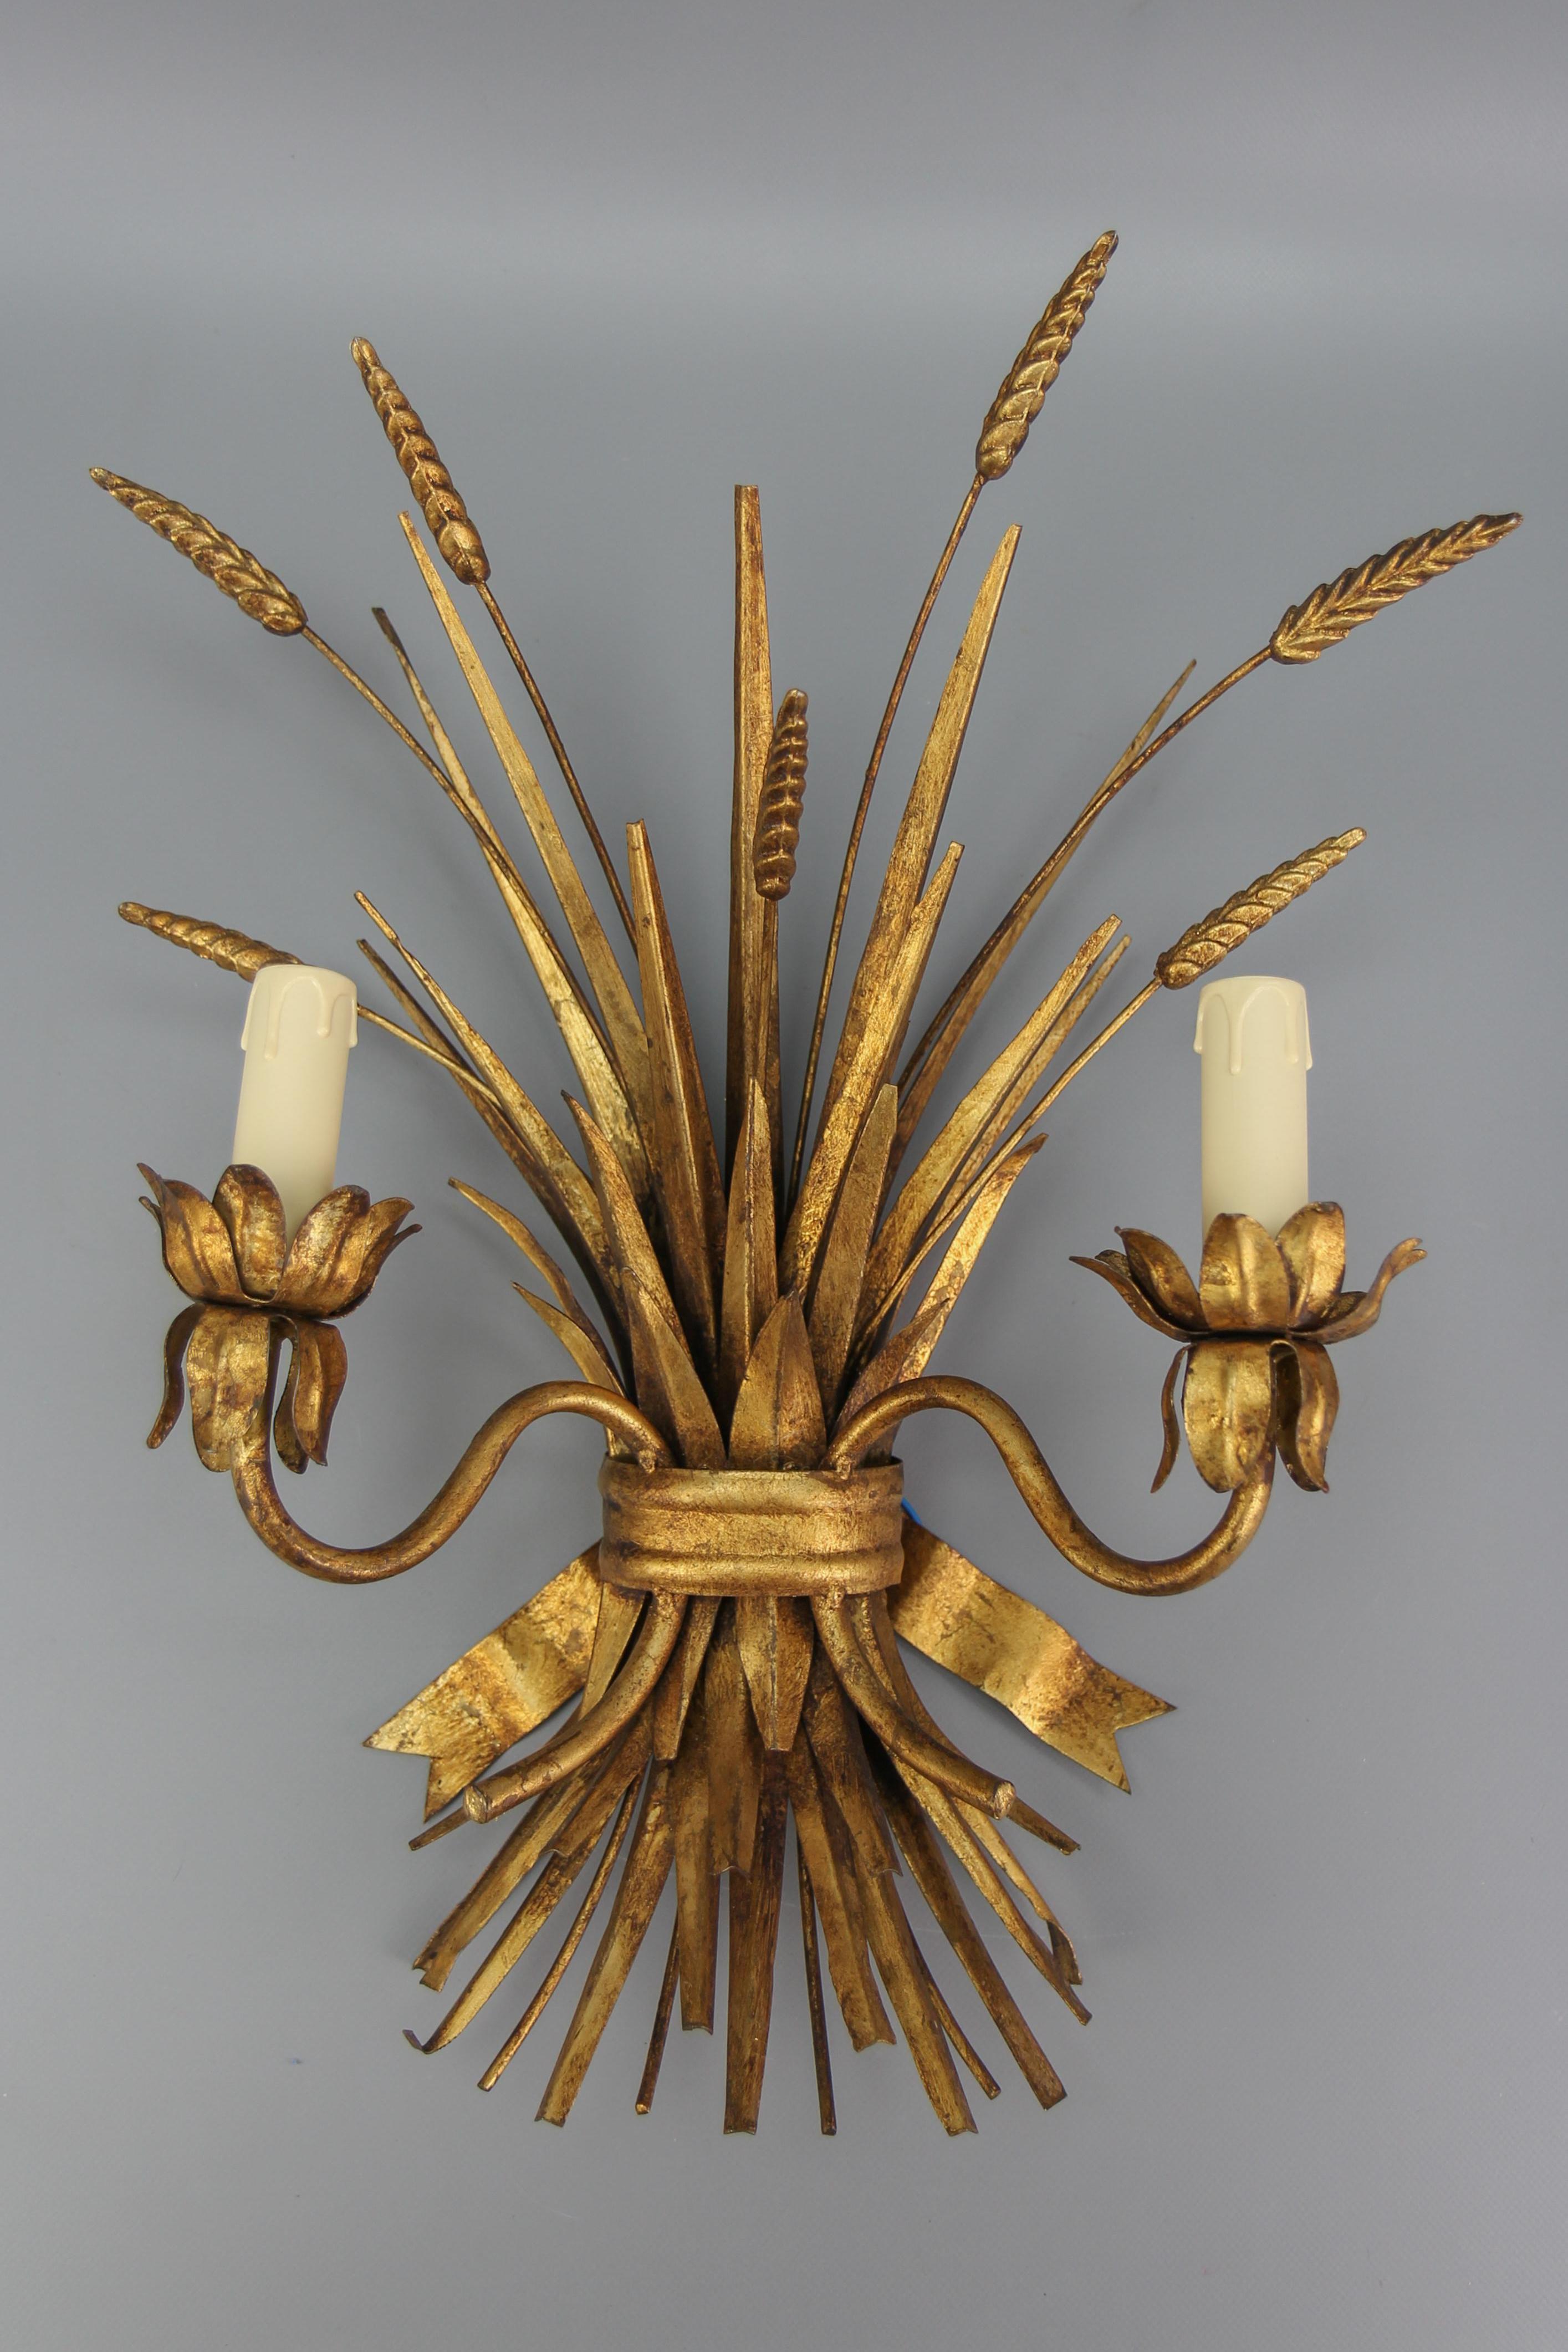 Hollywood Regency style gilt metal wheat sheaf wall sconce attributed to Hans Kögl, Germany, circa the 1960s.
A beautiful twin-branch wall sconce in the form of a sheaf of wheat - a sheaf of leaves and seven ears of wheat.
The wall light is made